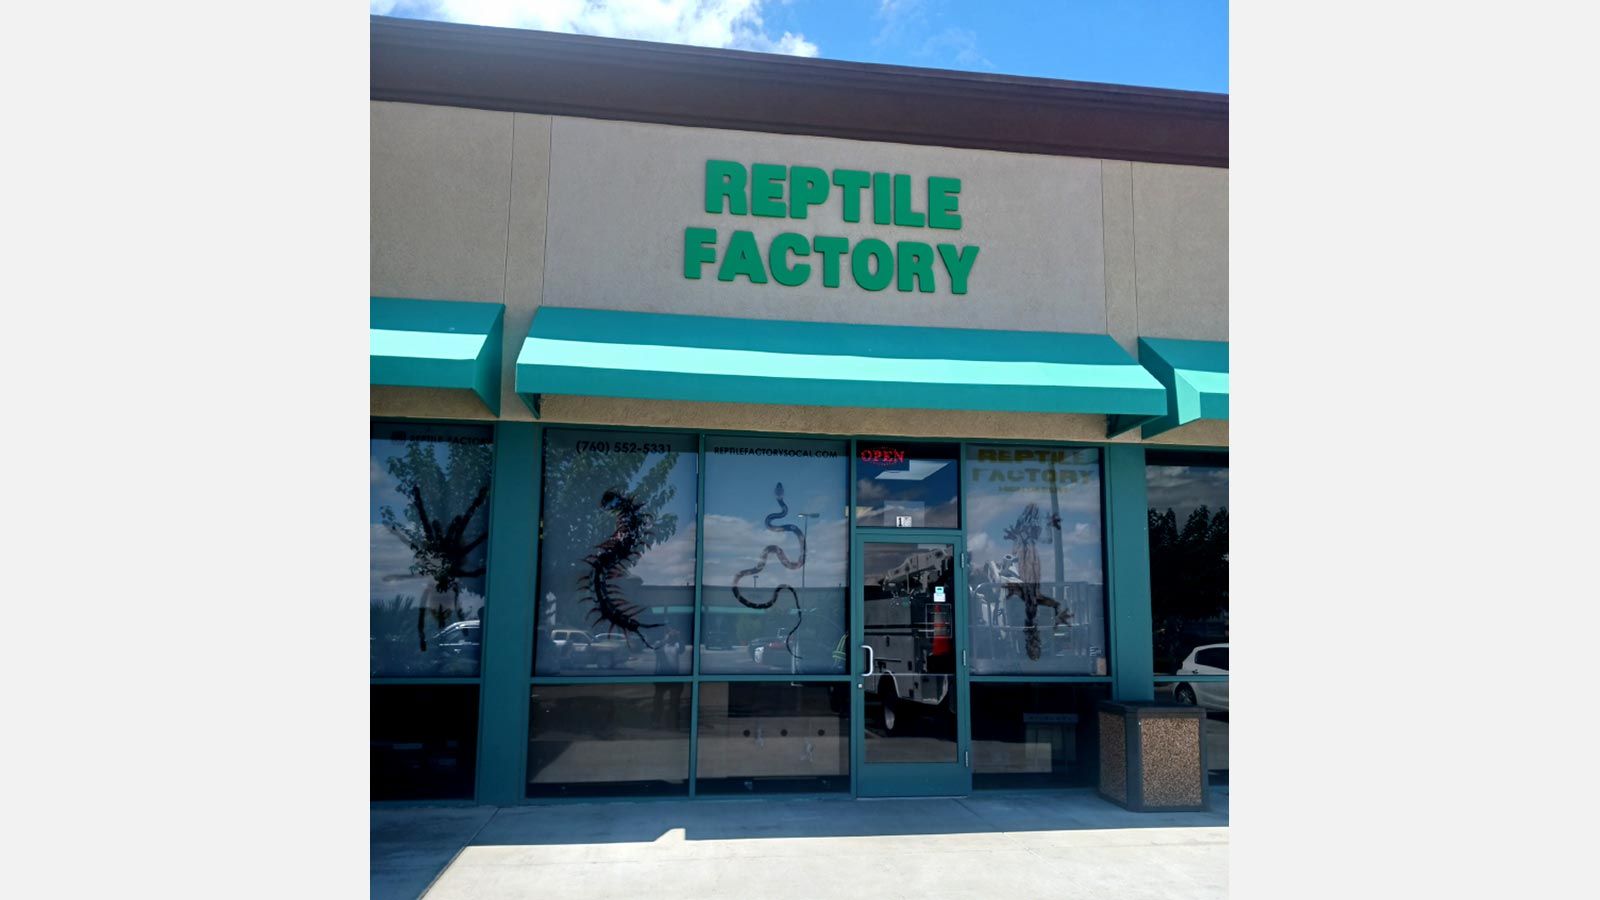 Reptile Factory outdoor sign installed on the building